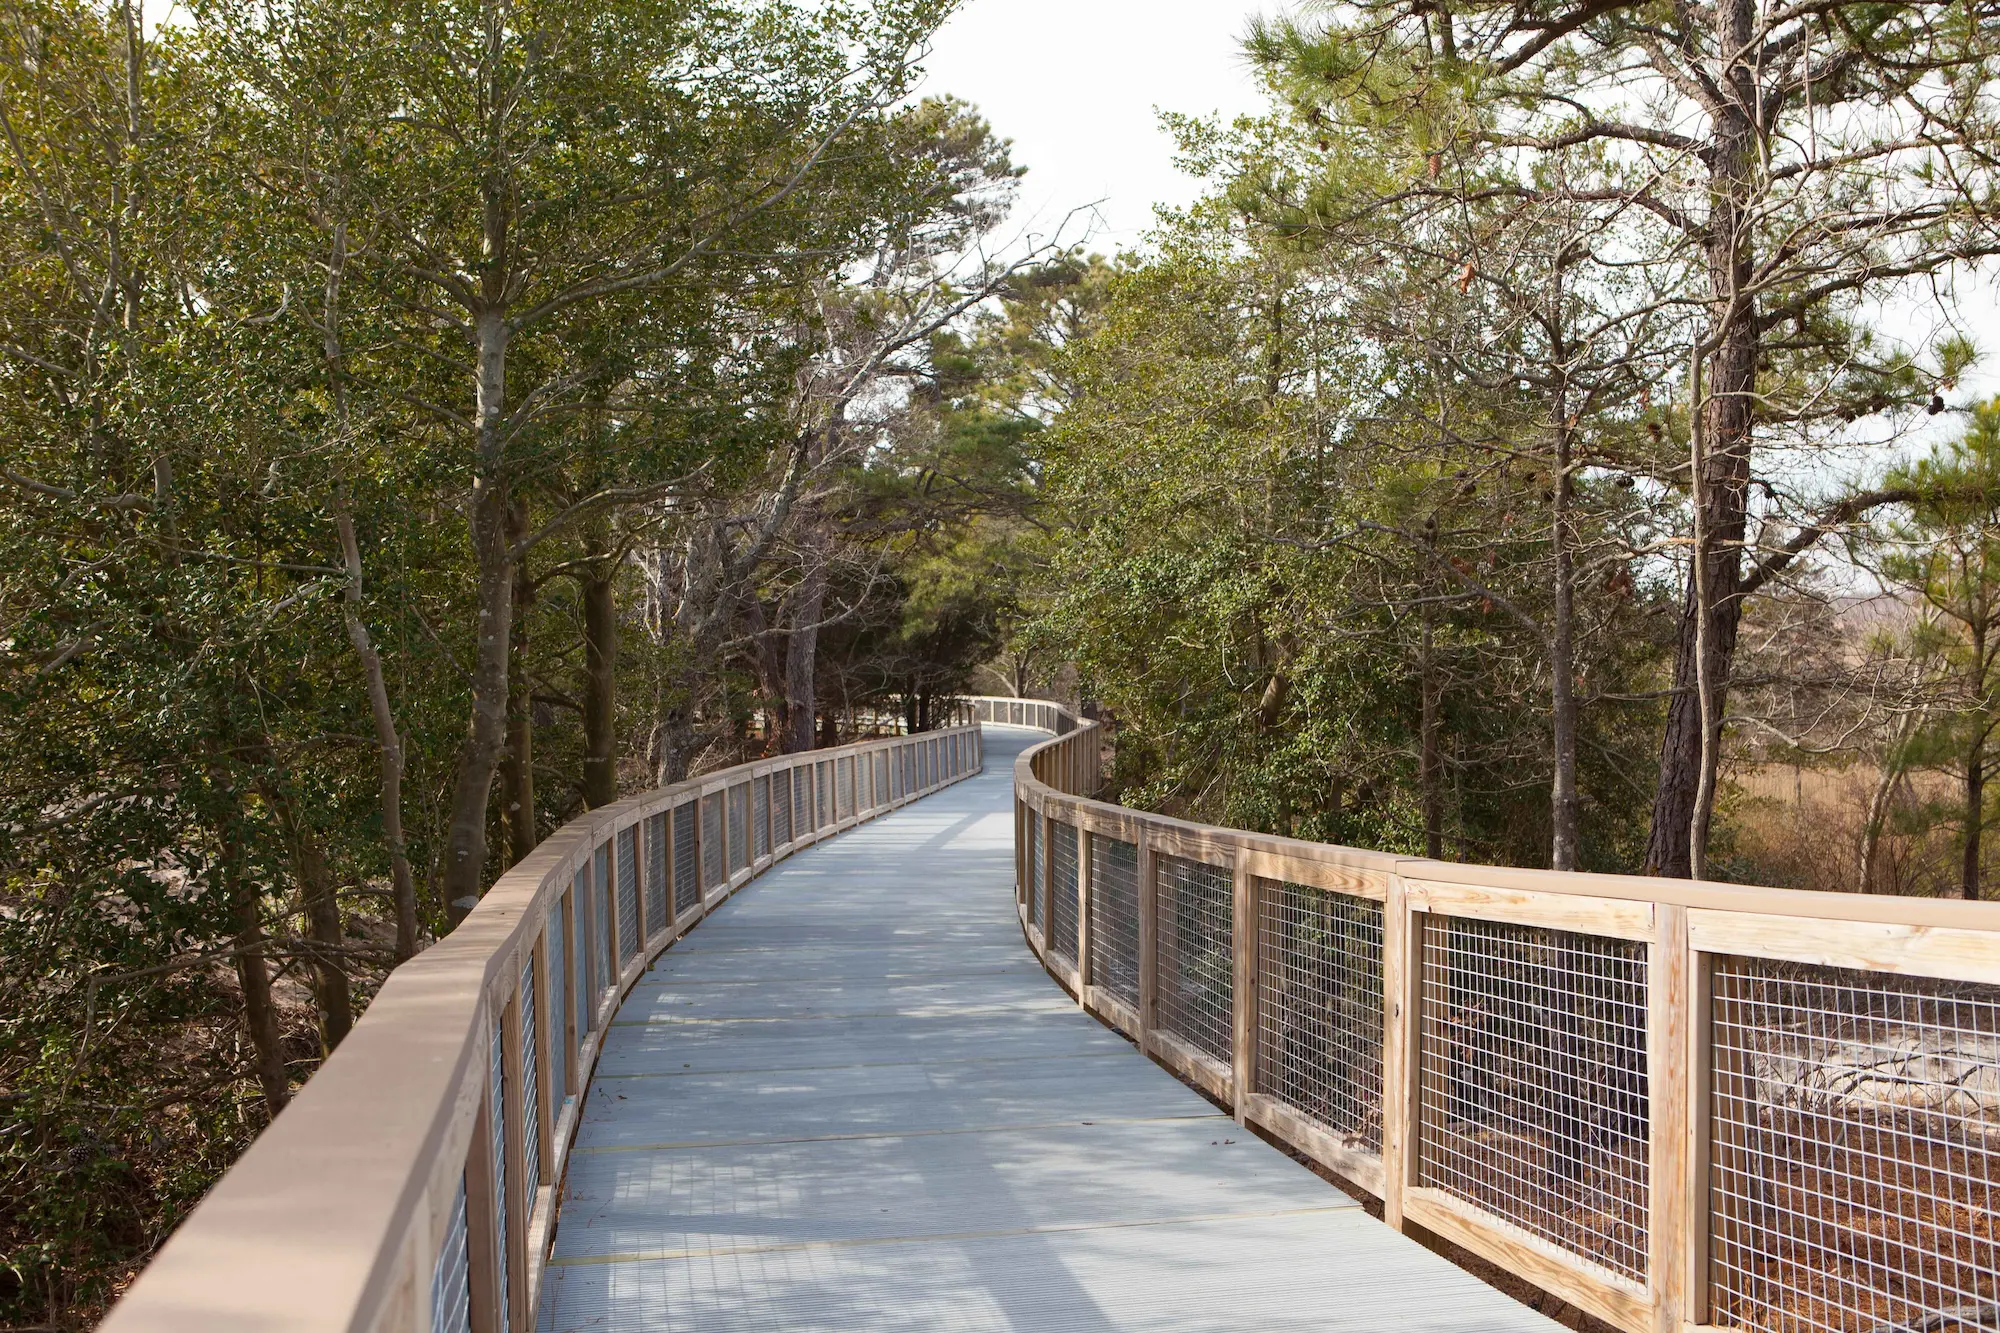 The Gordons Pond trail is one of the superintendents' picks at Delaware State Parks. Courtesy of Delaware State Parks.